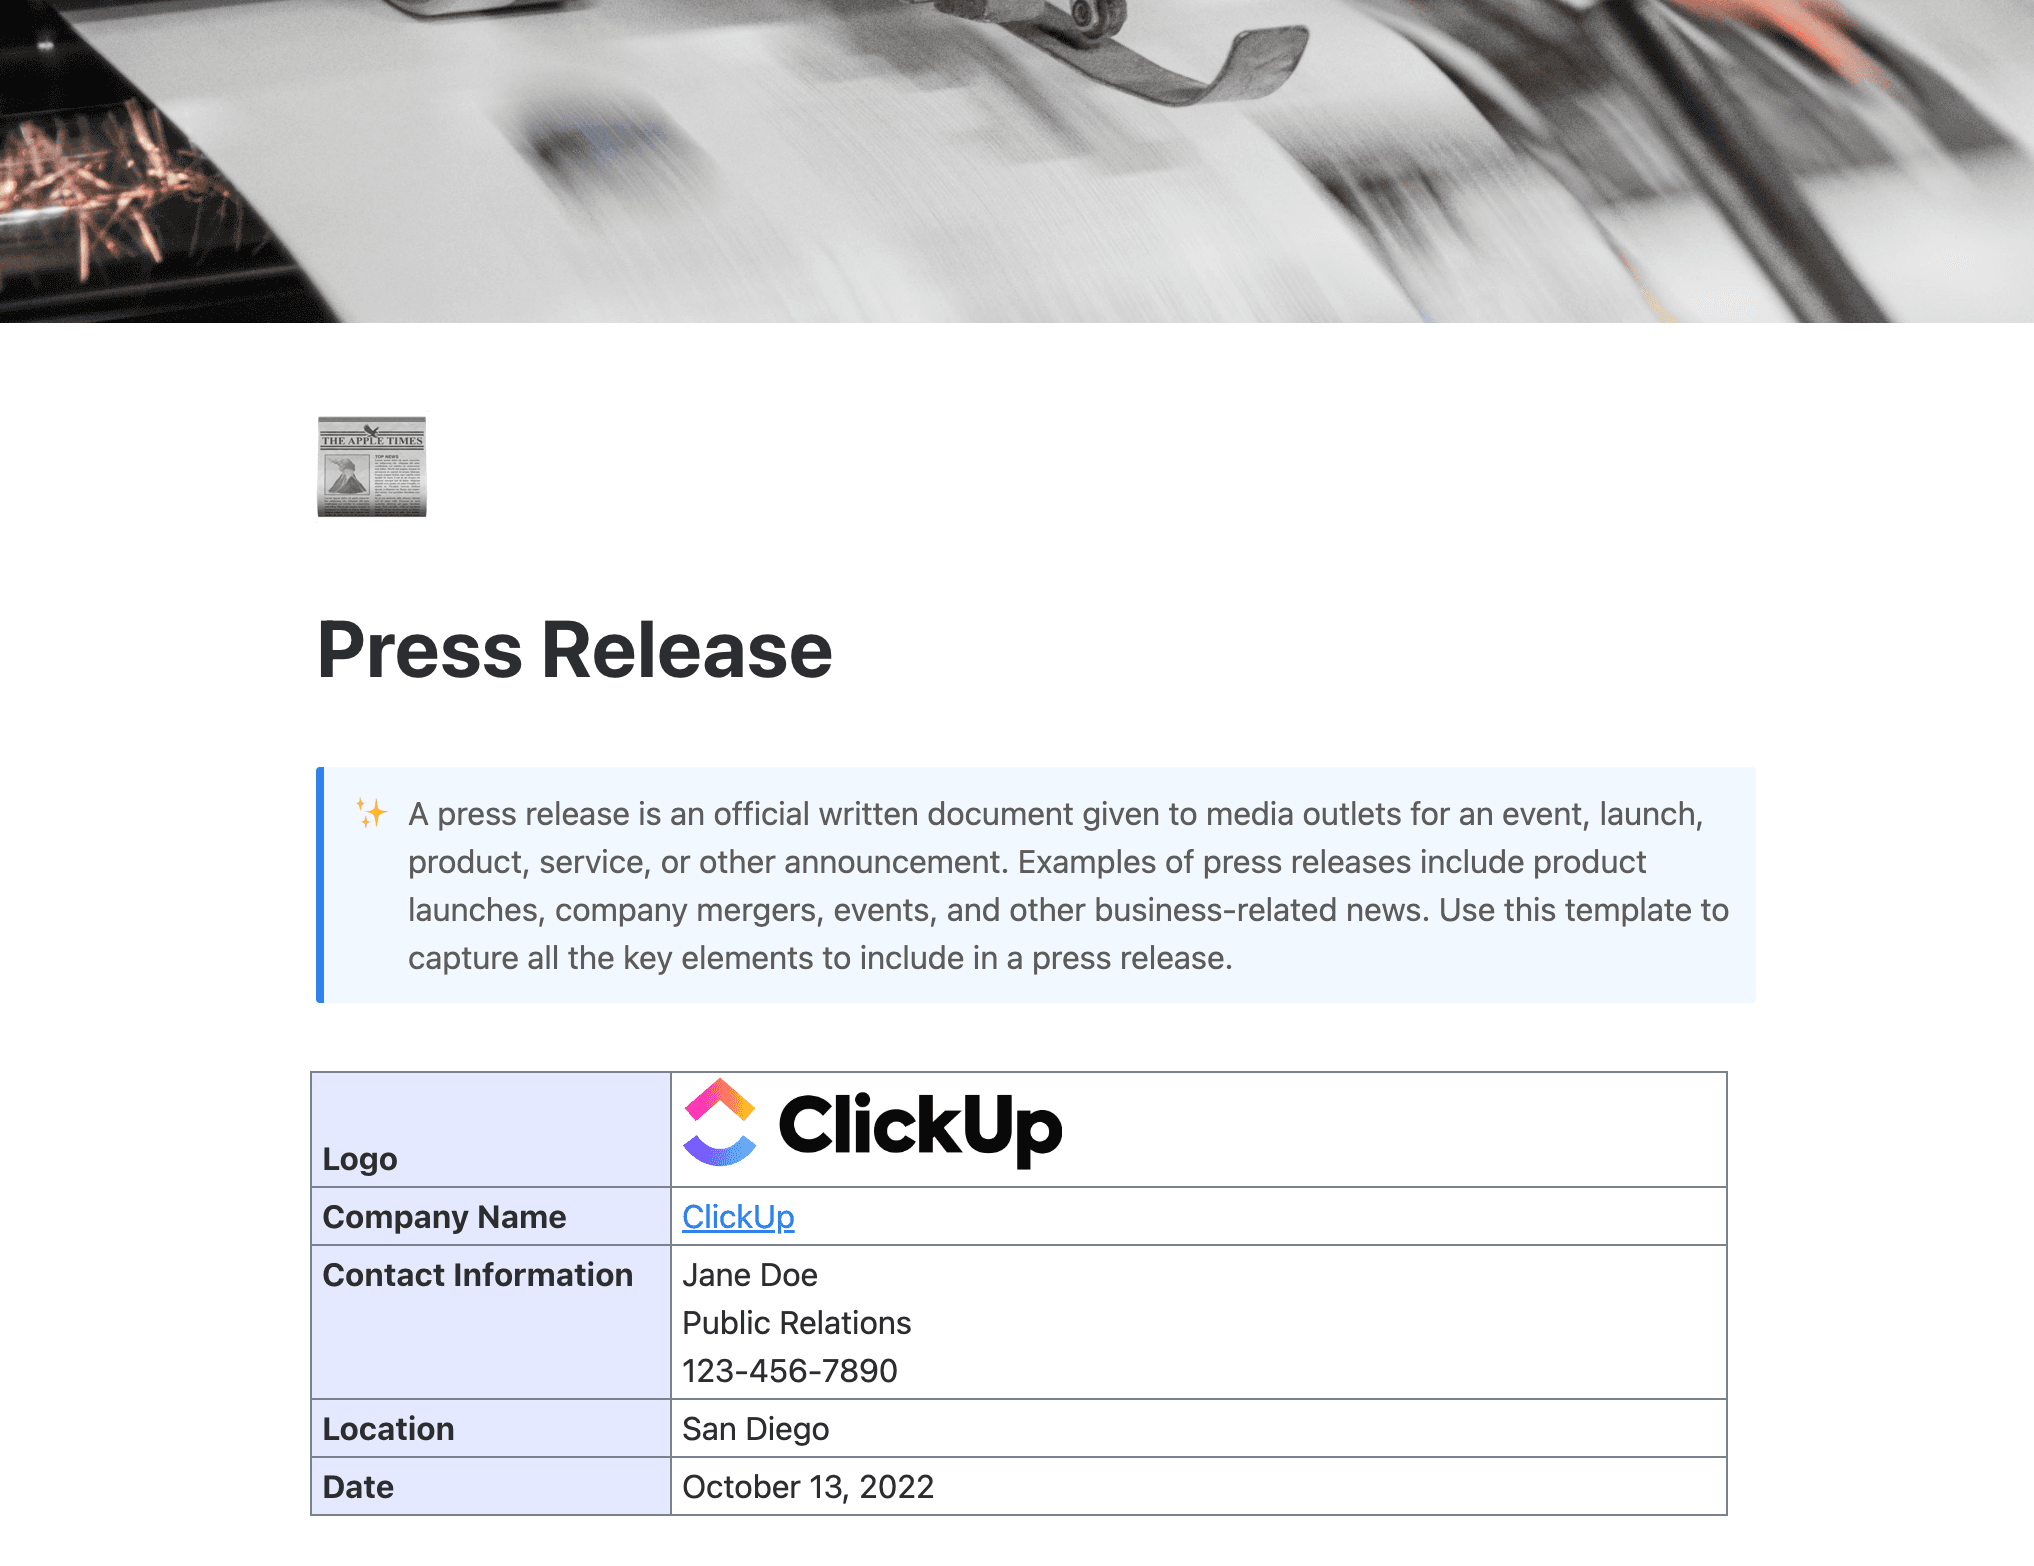 A press release is an official written document given to media outlets for an event, launch, product, service, or other announcement. Examples of press releases include product launches, company mergers, events, and other business-related news. Use this template to capture all the key elements to include in a press release.